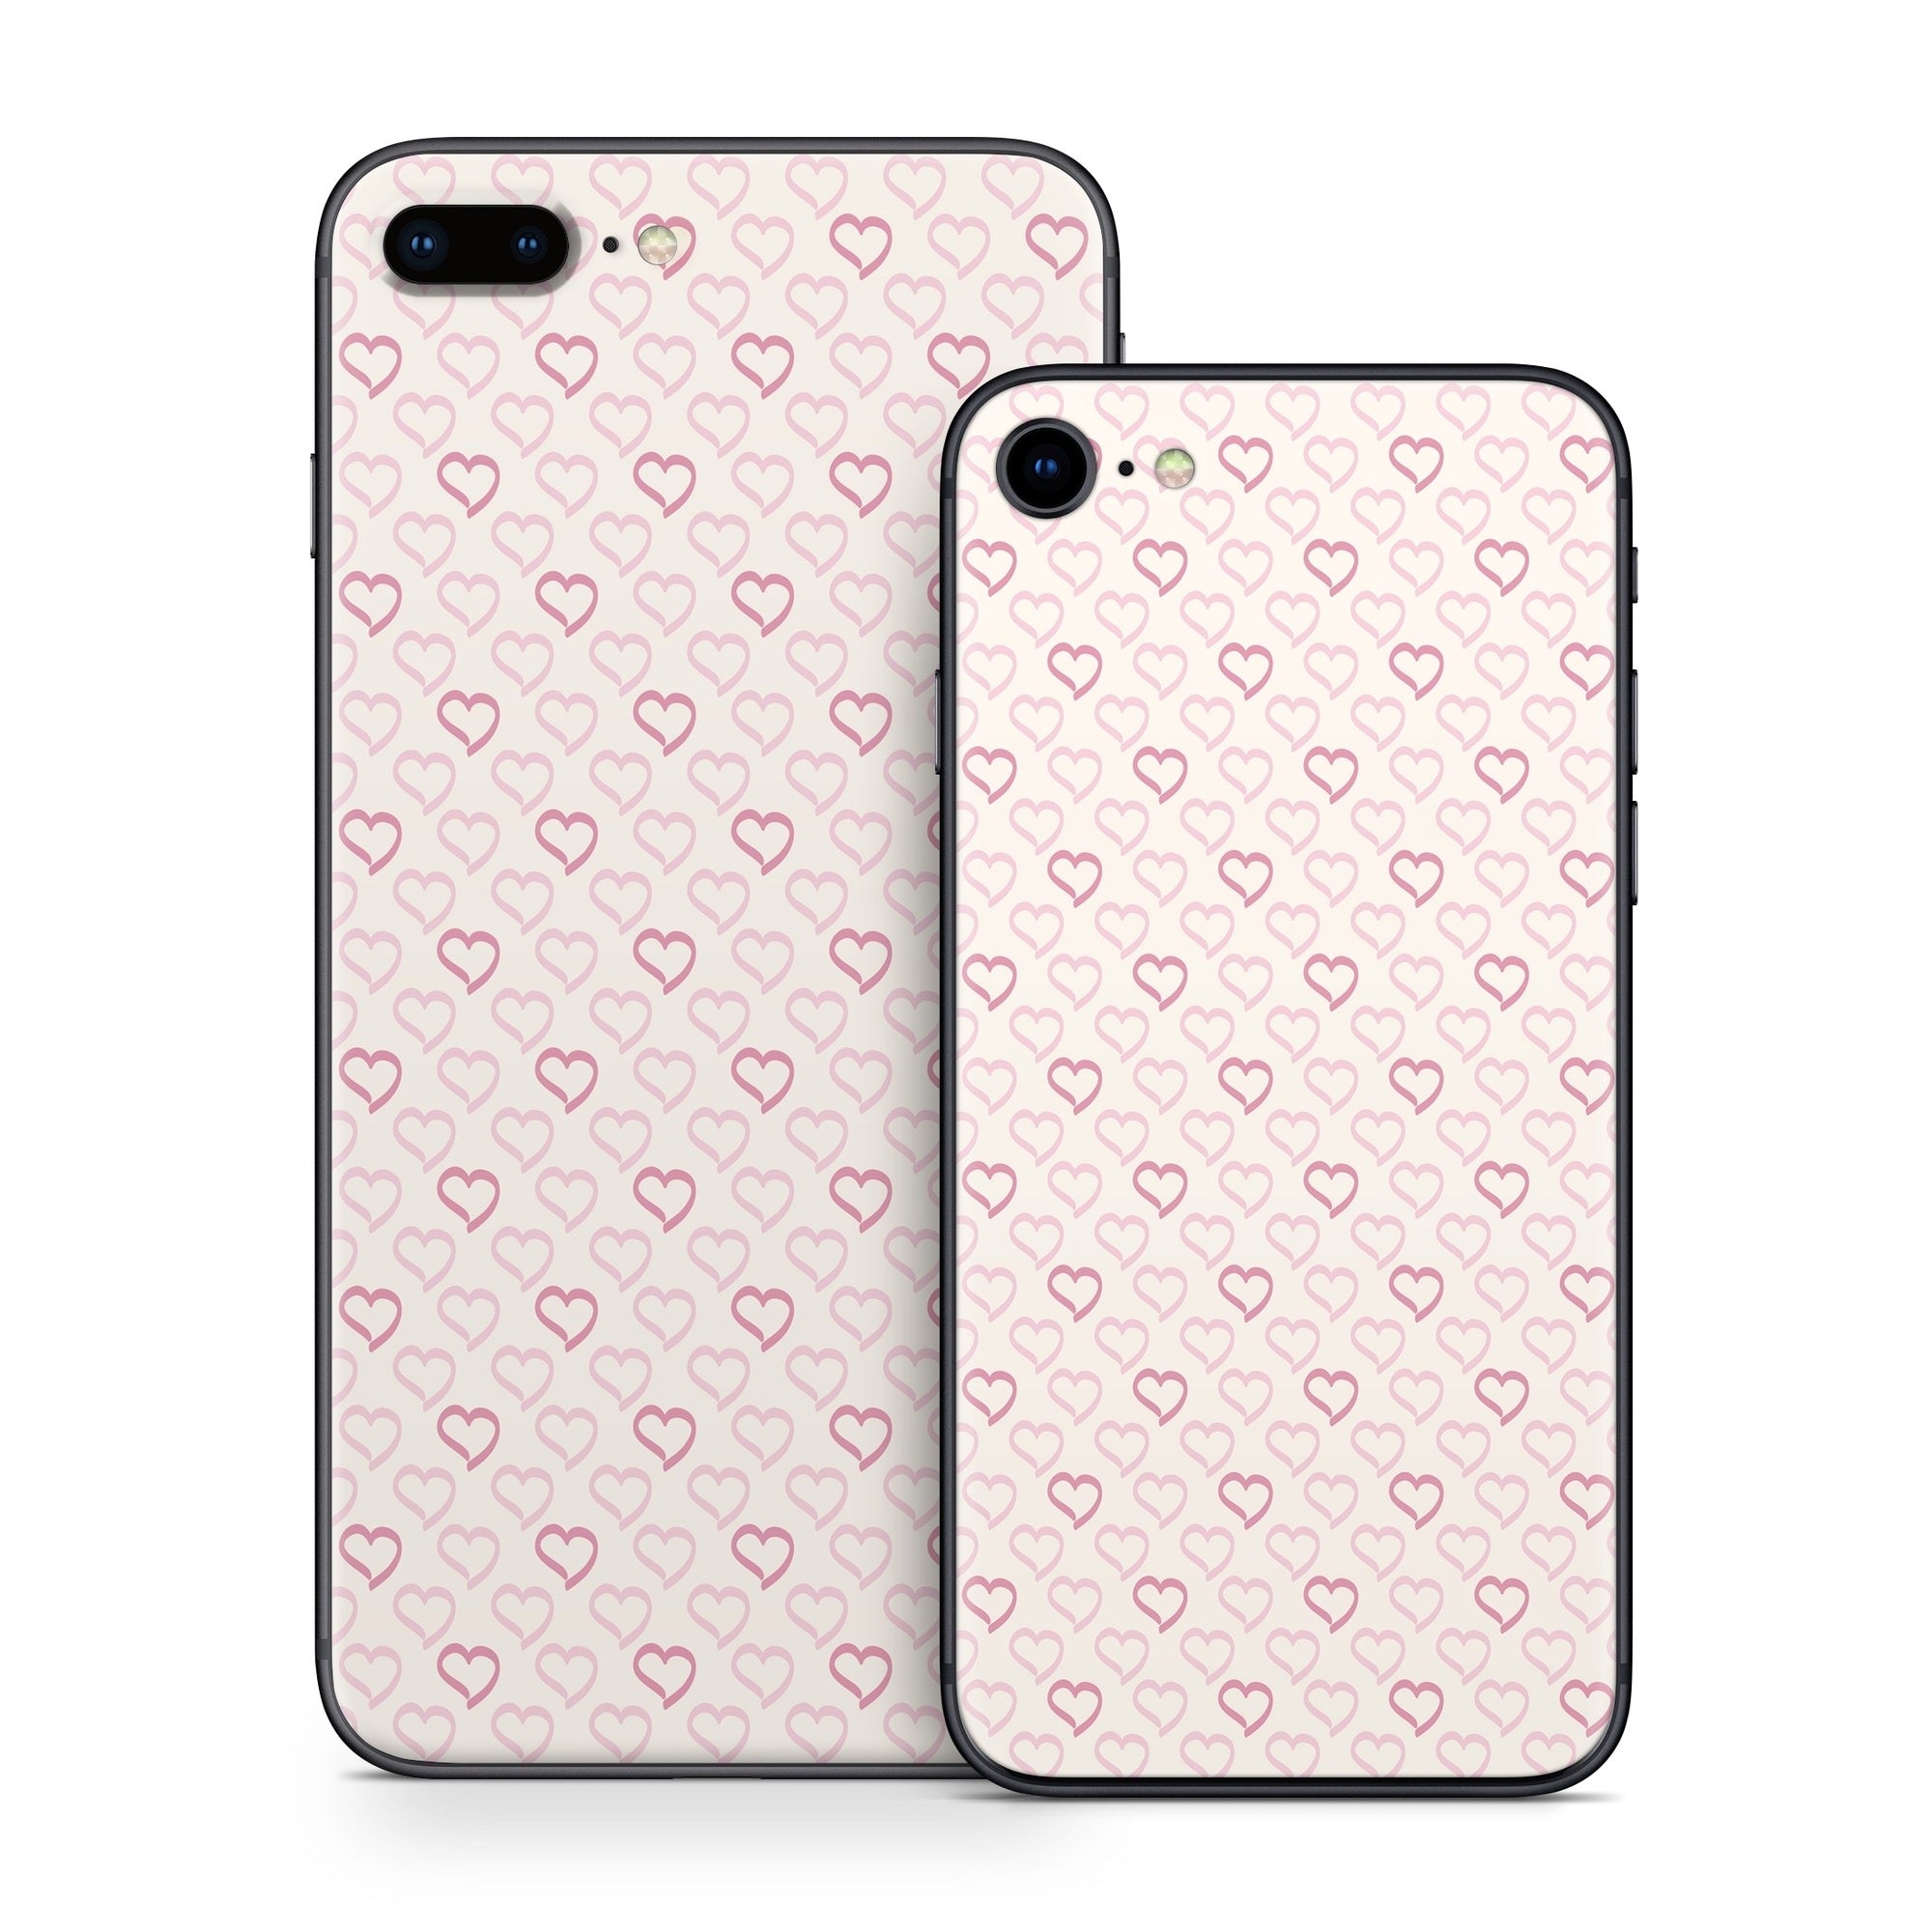 Patterned Hearts - Apple iPhone 8 Skin